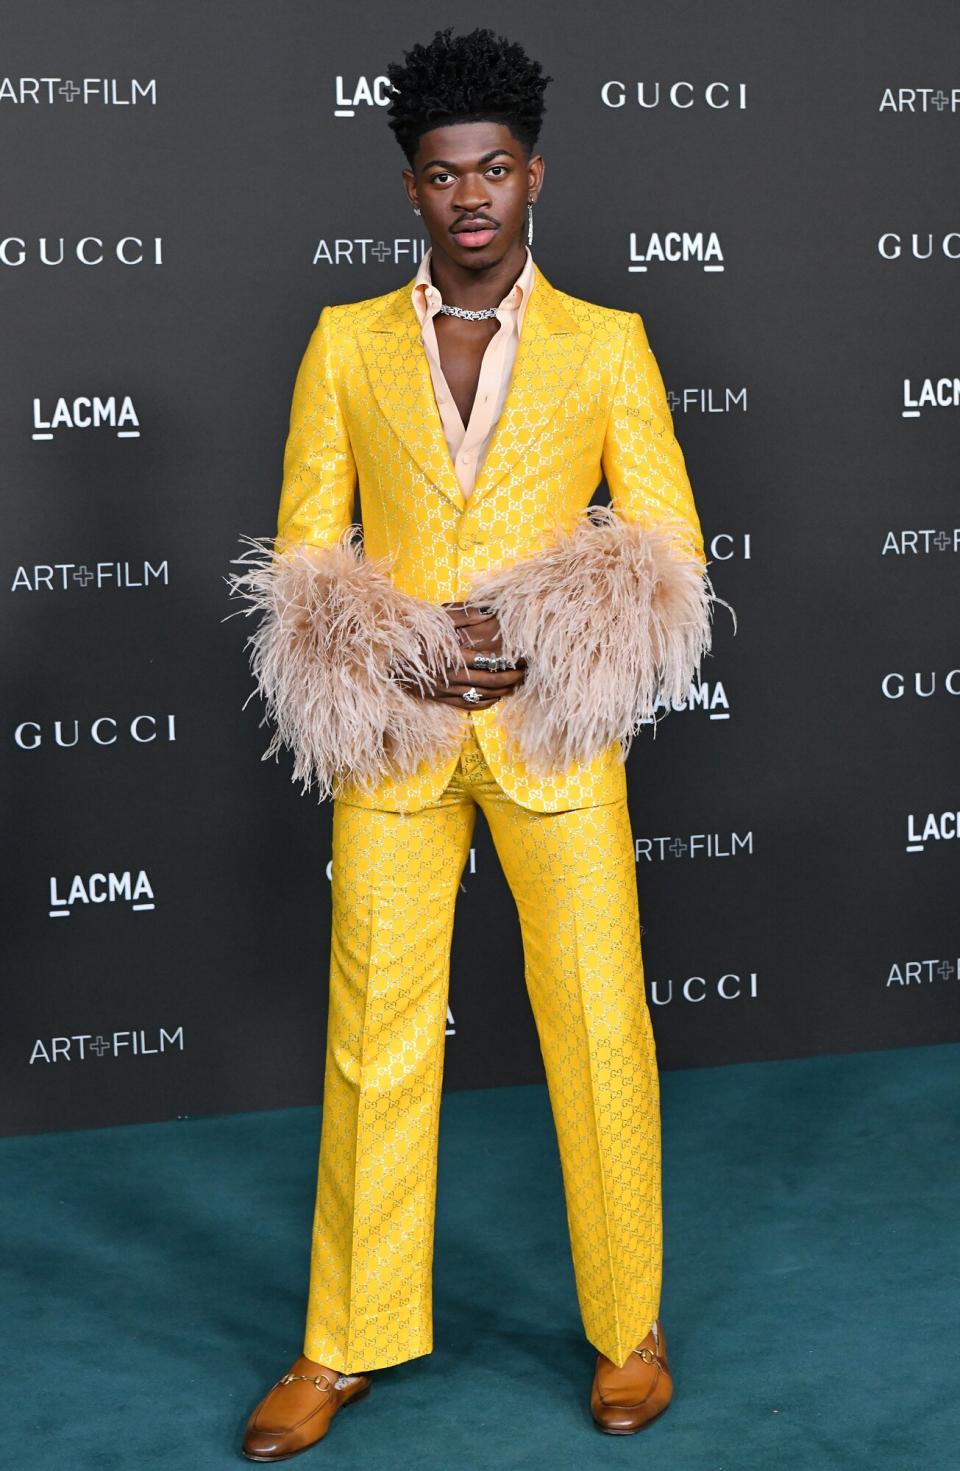 Lil Nas X attends the 10th Annual LACMA Art+Film Gala presented by Gucci at Los Angeles County Museum of Art on November 06, 2021 in Los Angeles, California